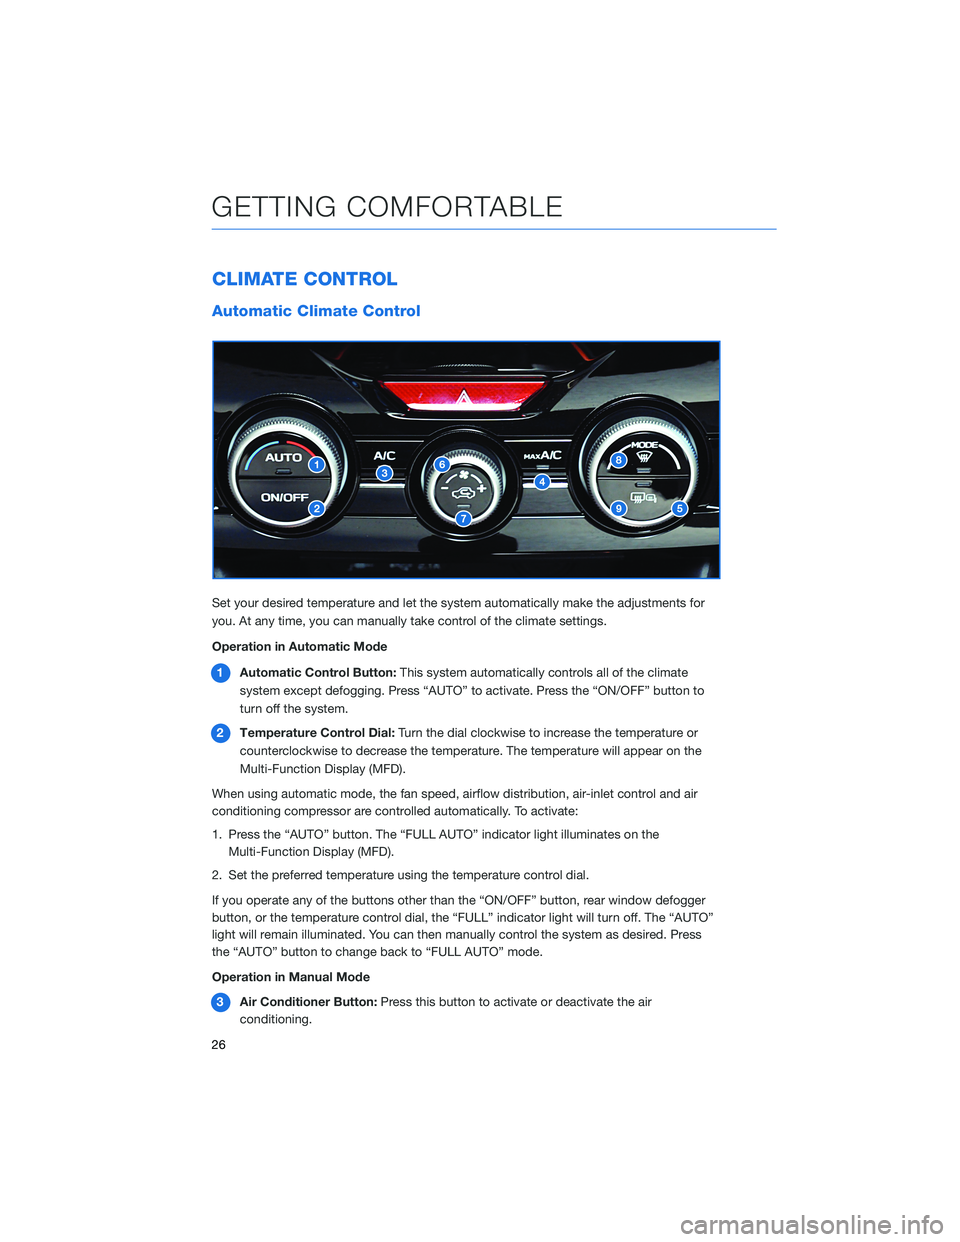 SUBARU CROSSTREK 2022  Getting Started Guide CLIMATE CONTROL
Automatic Climate Control
Set your desired temperature and let the system automatically make the adjustments for
you. At any time, you can manually take control of the climate settings